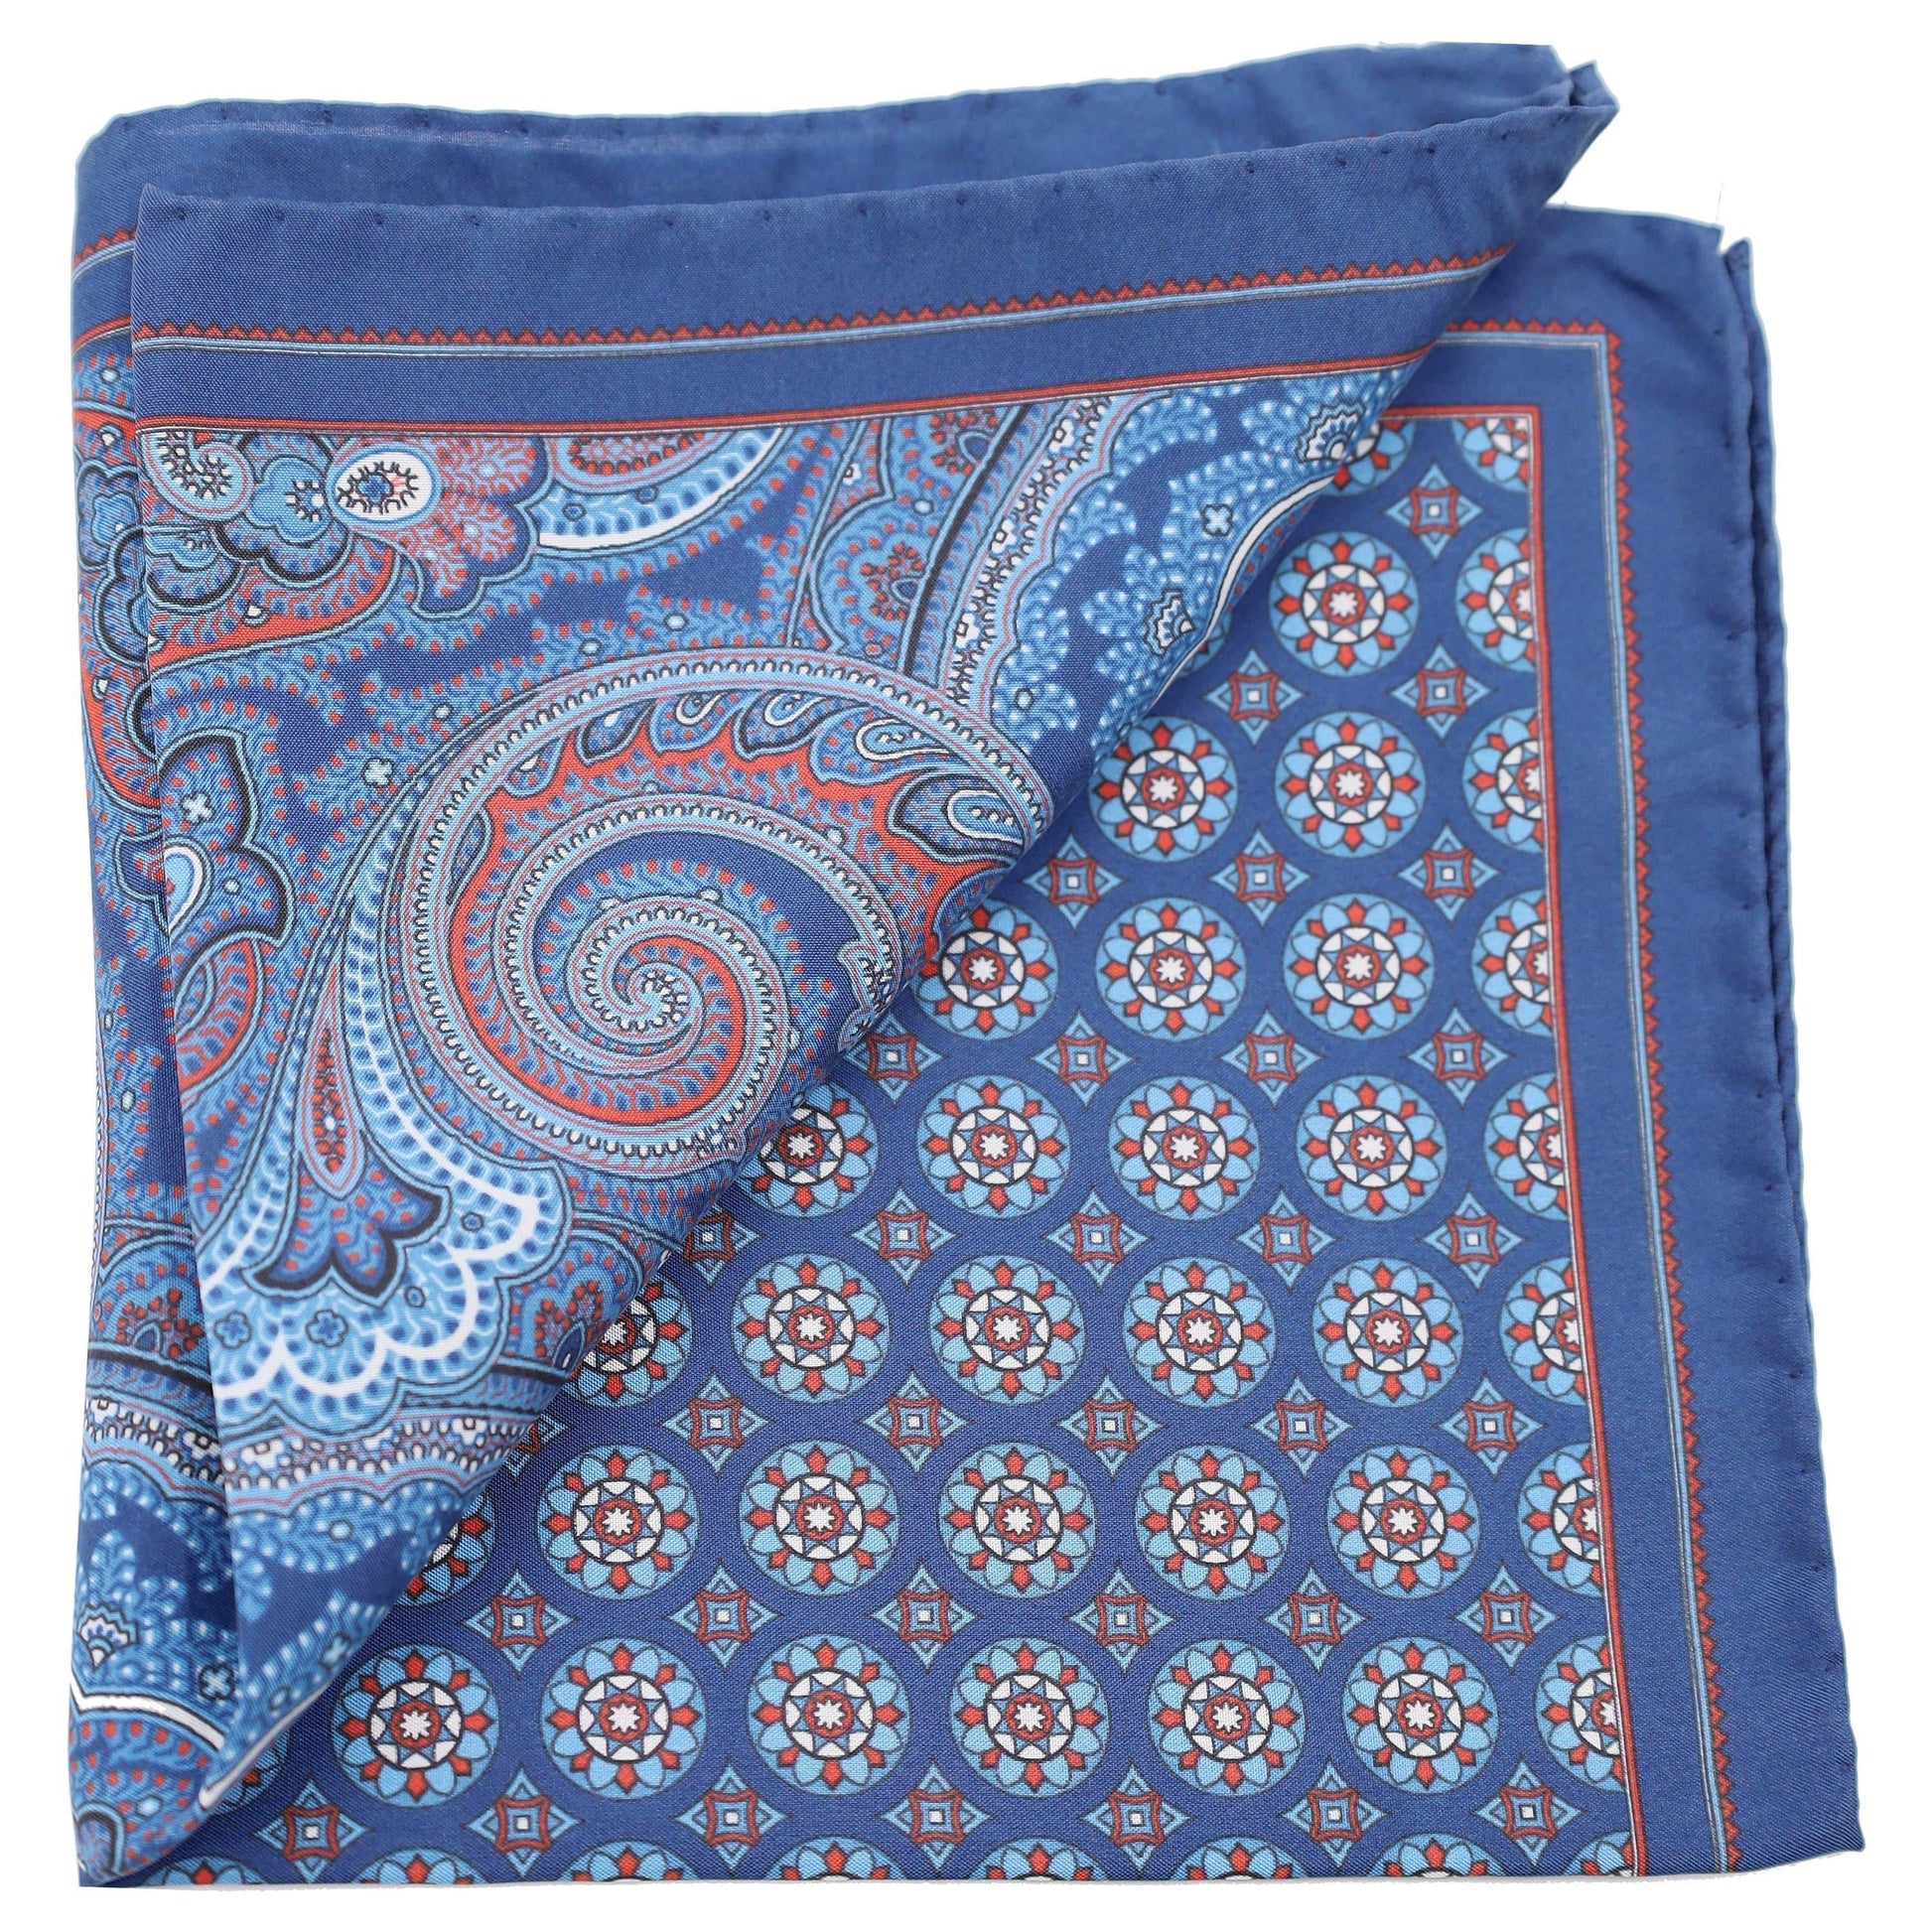 Sky Blue Paisley and Brown Meddalion Silk Pocket Square - Just White Shirts